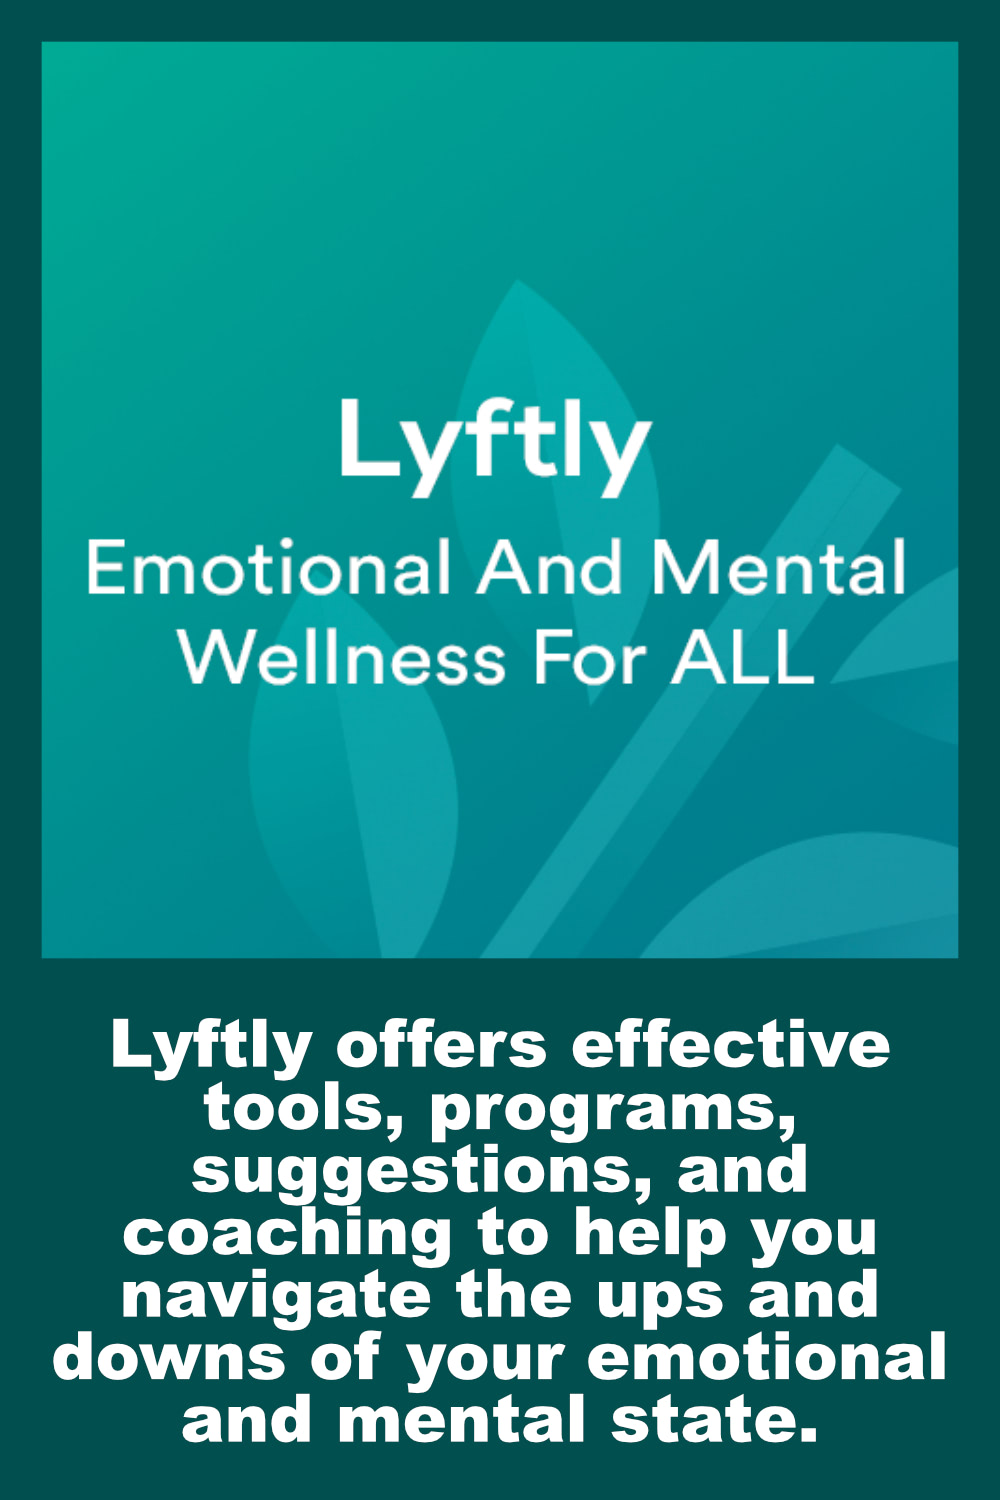 Lyftly offers effective tools, programs, suggestions, and coaching to help you navigate the ups and downs of your emotional and mental state.